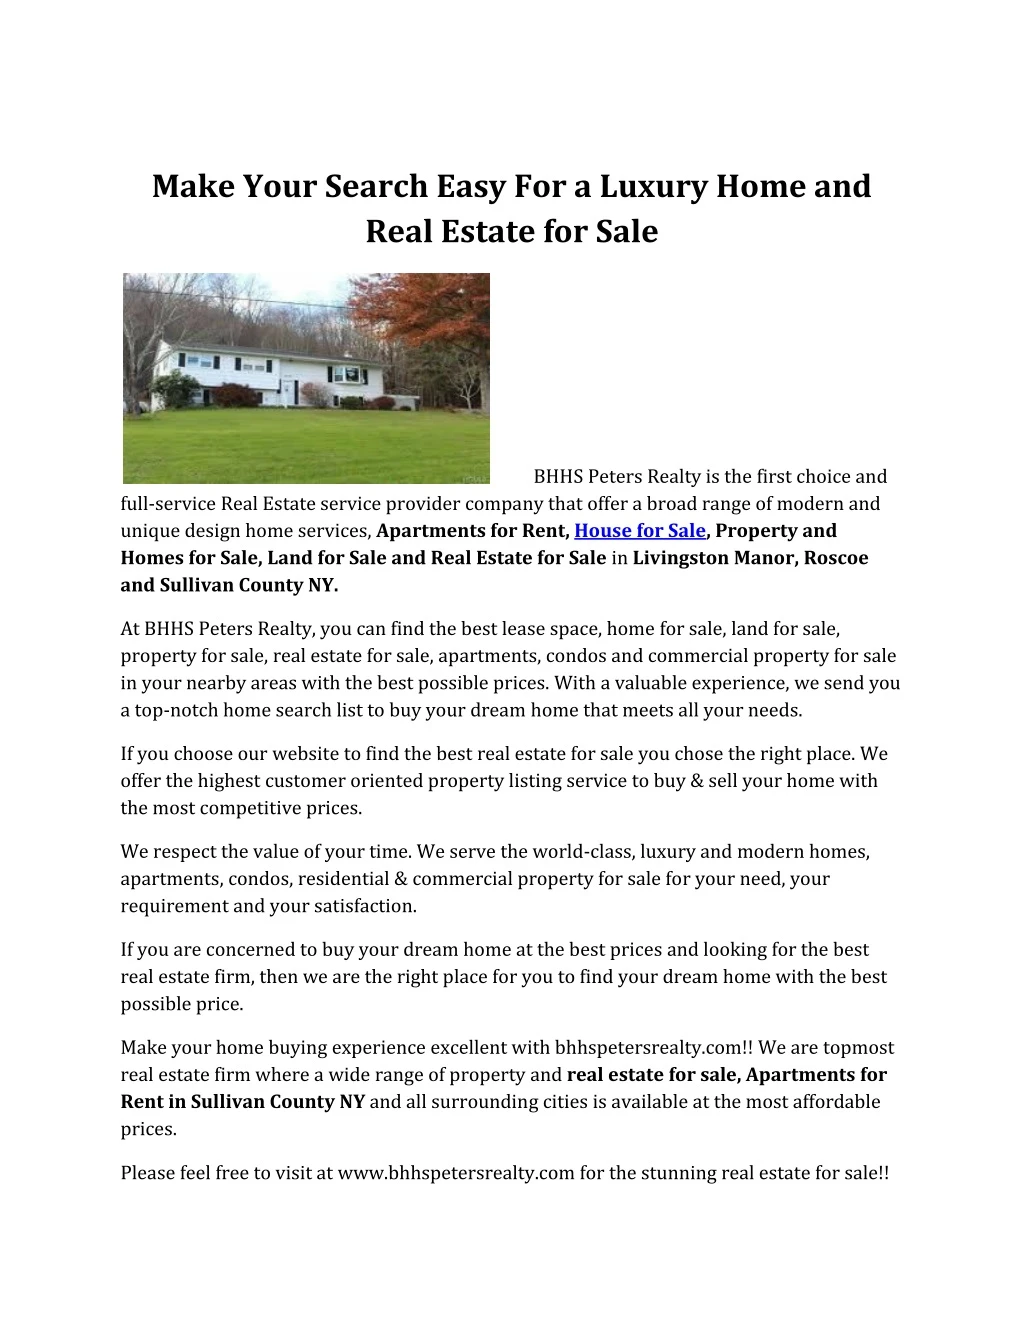 make your search easy for a luxury home and real